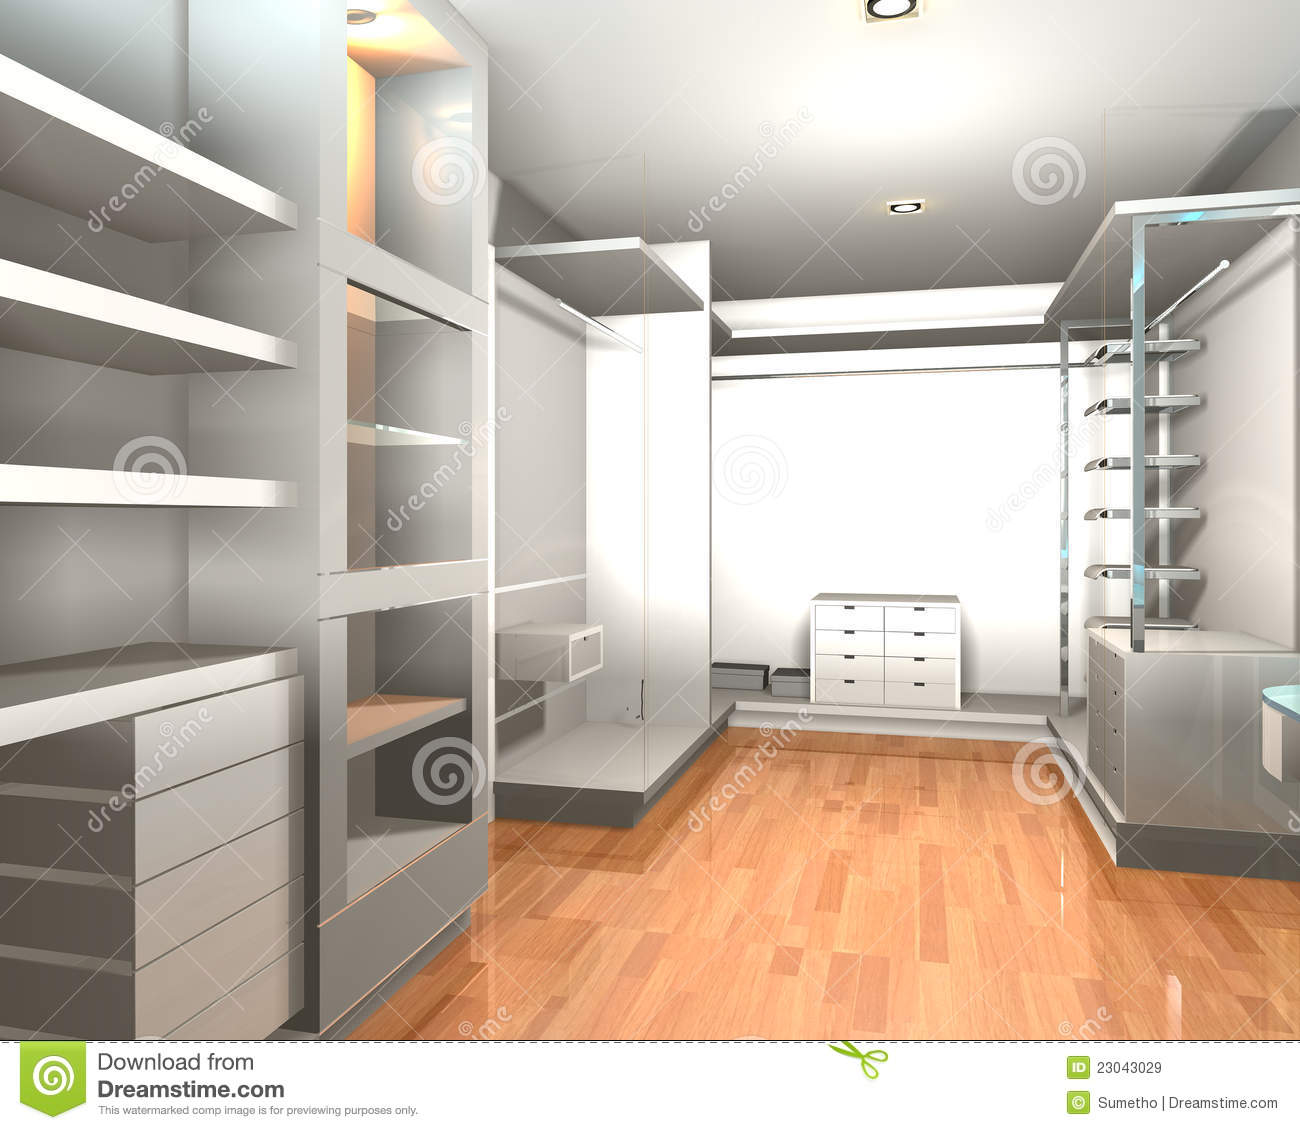 Interior Modern Room For Walk In Closet With Shelves And White Wall